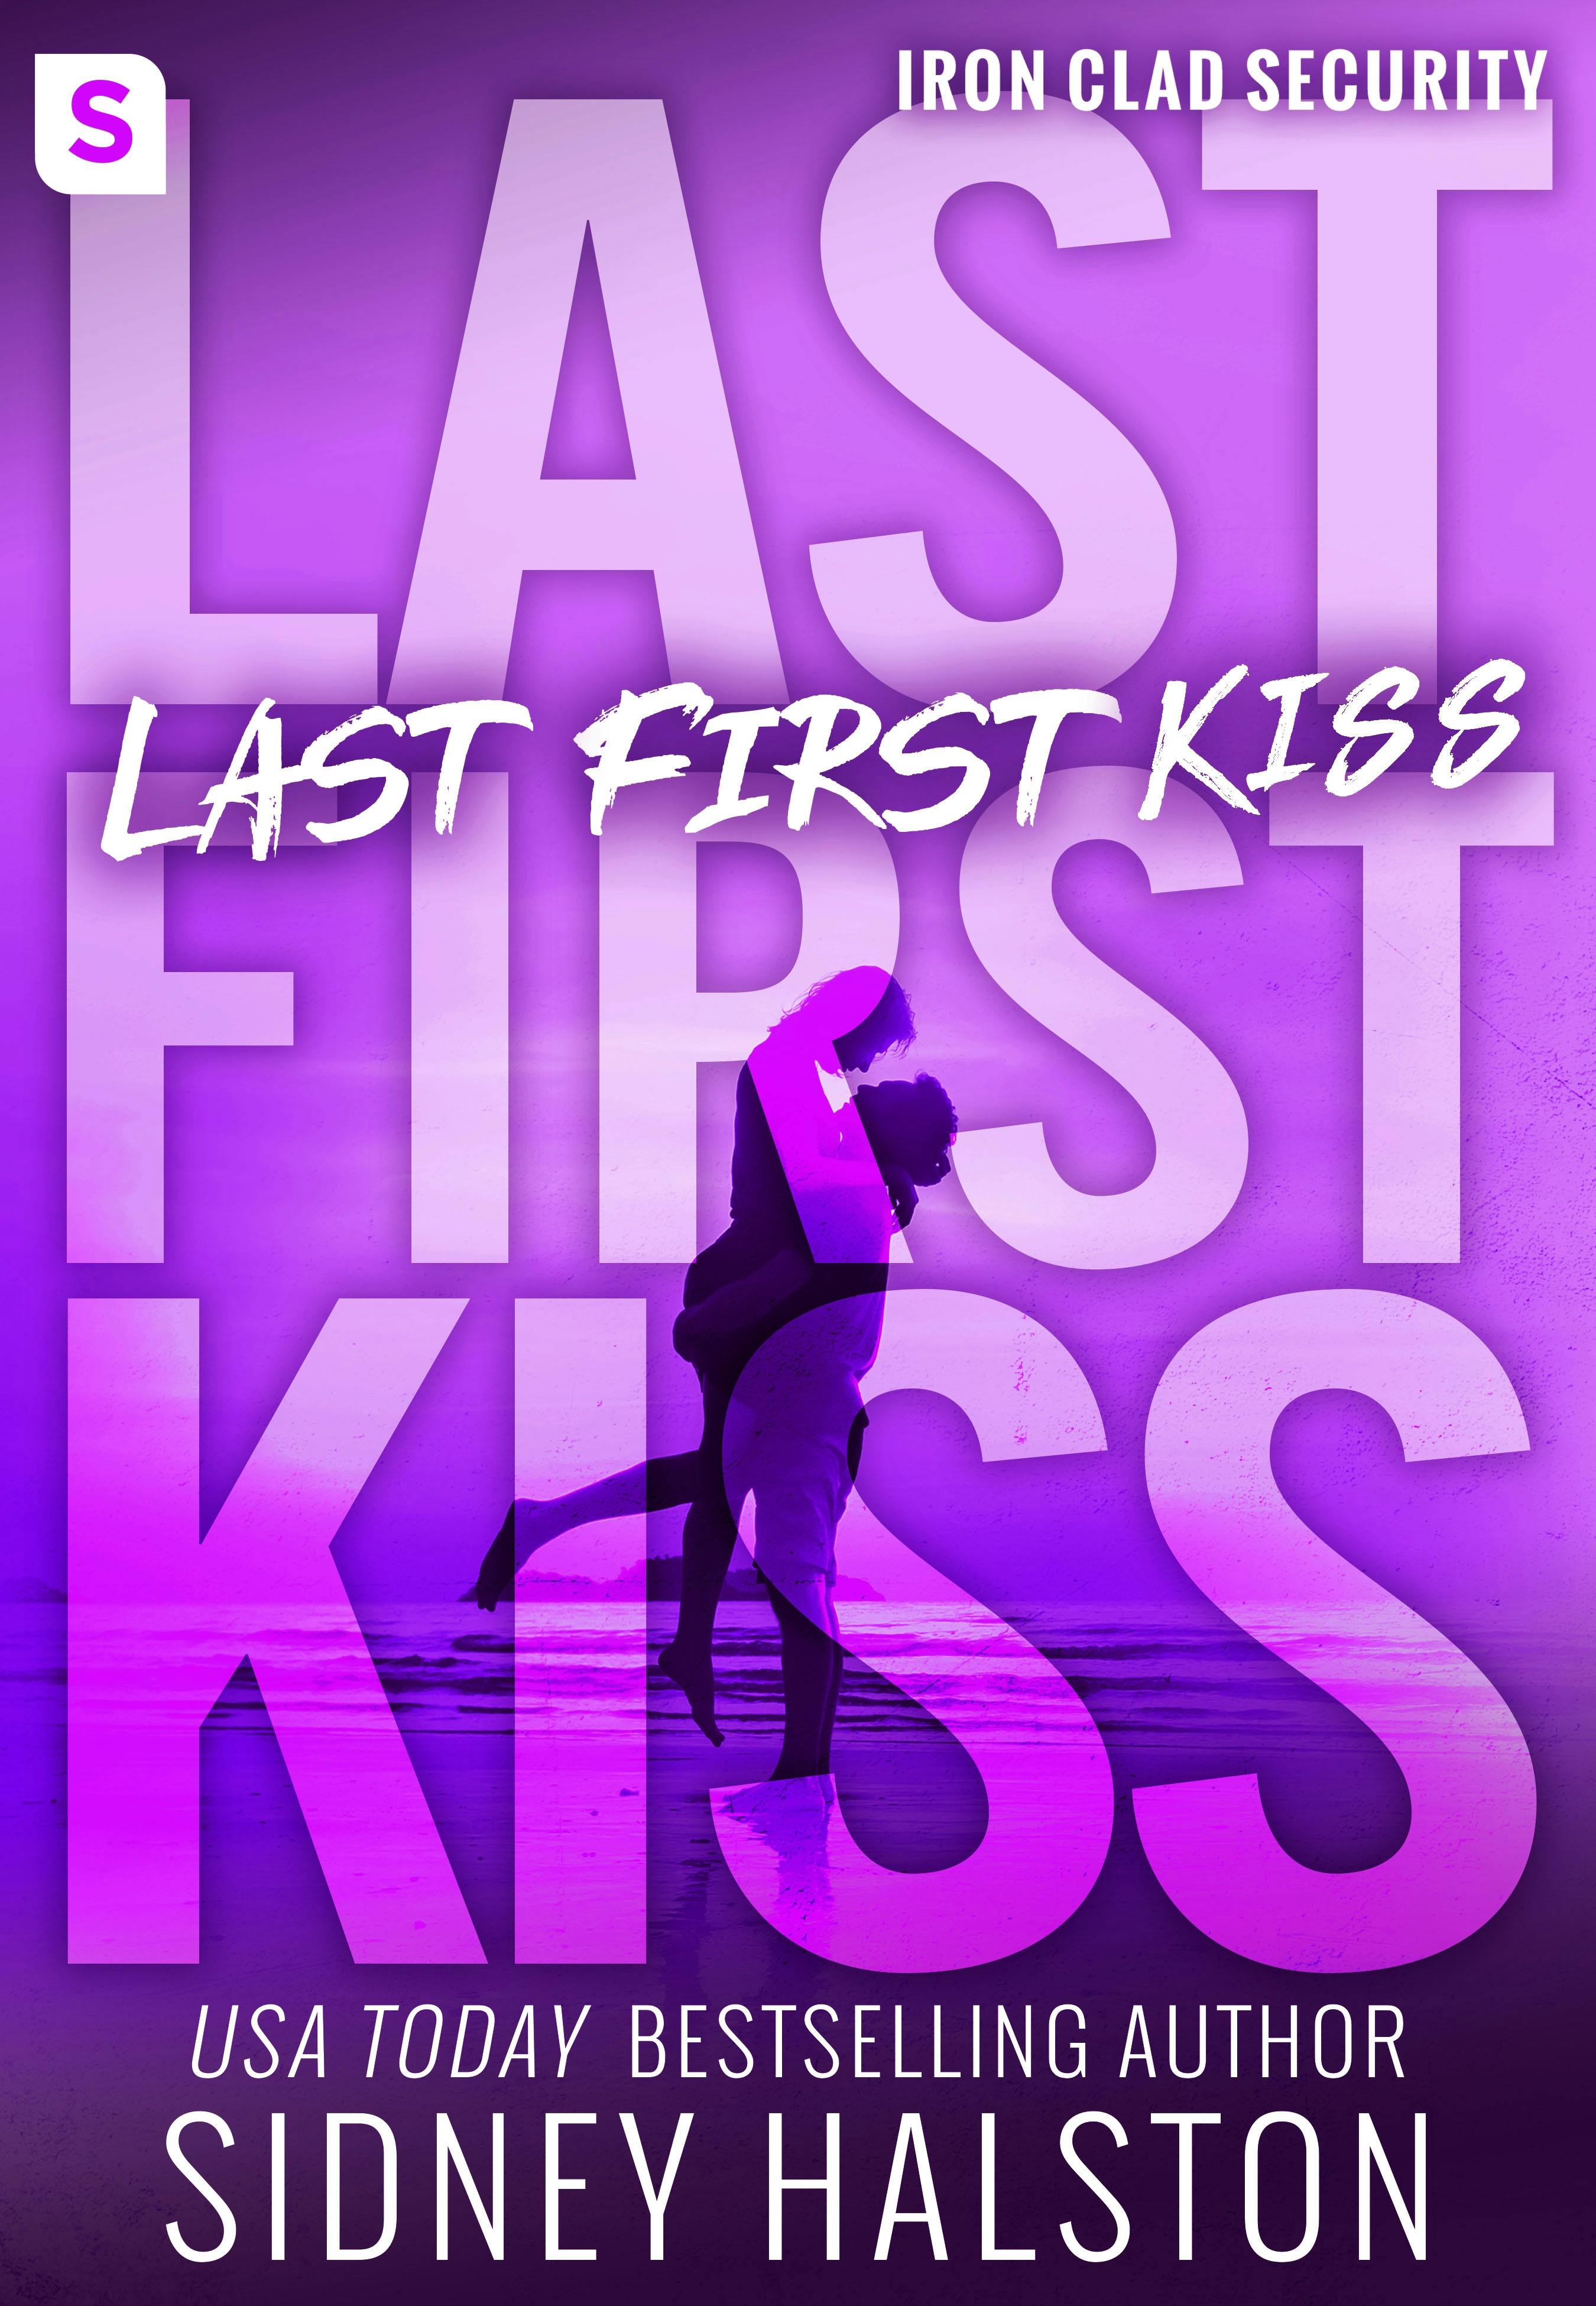 Image of Last First Kiss